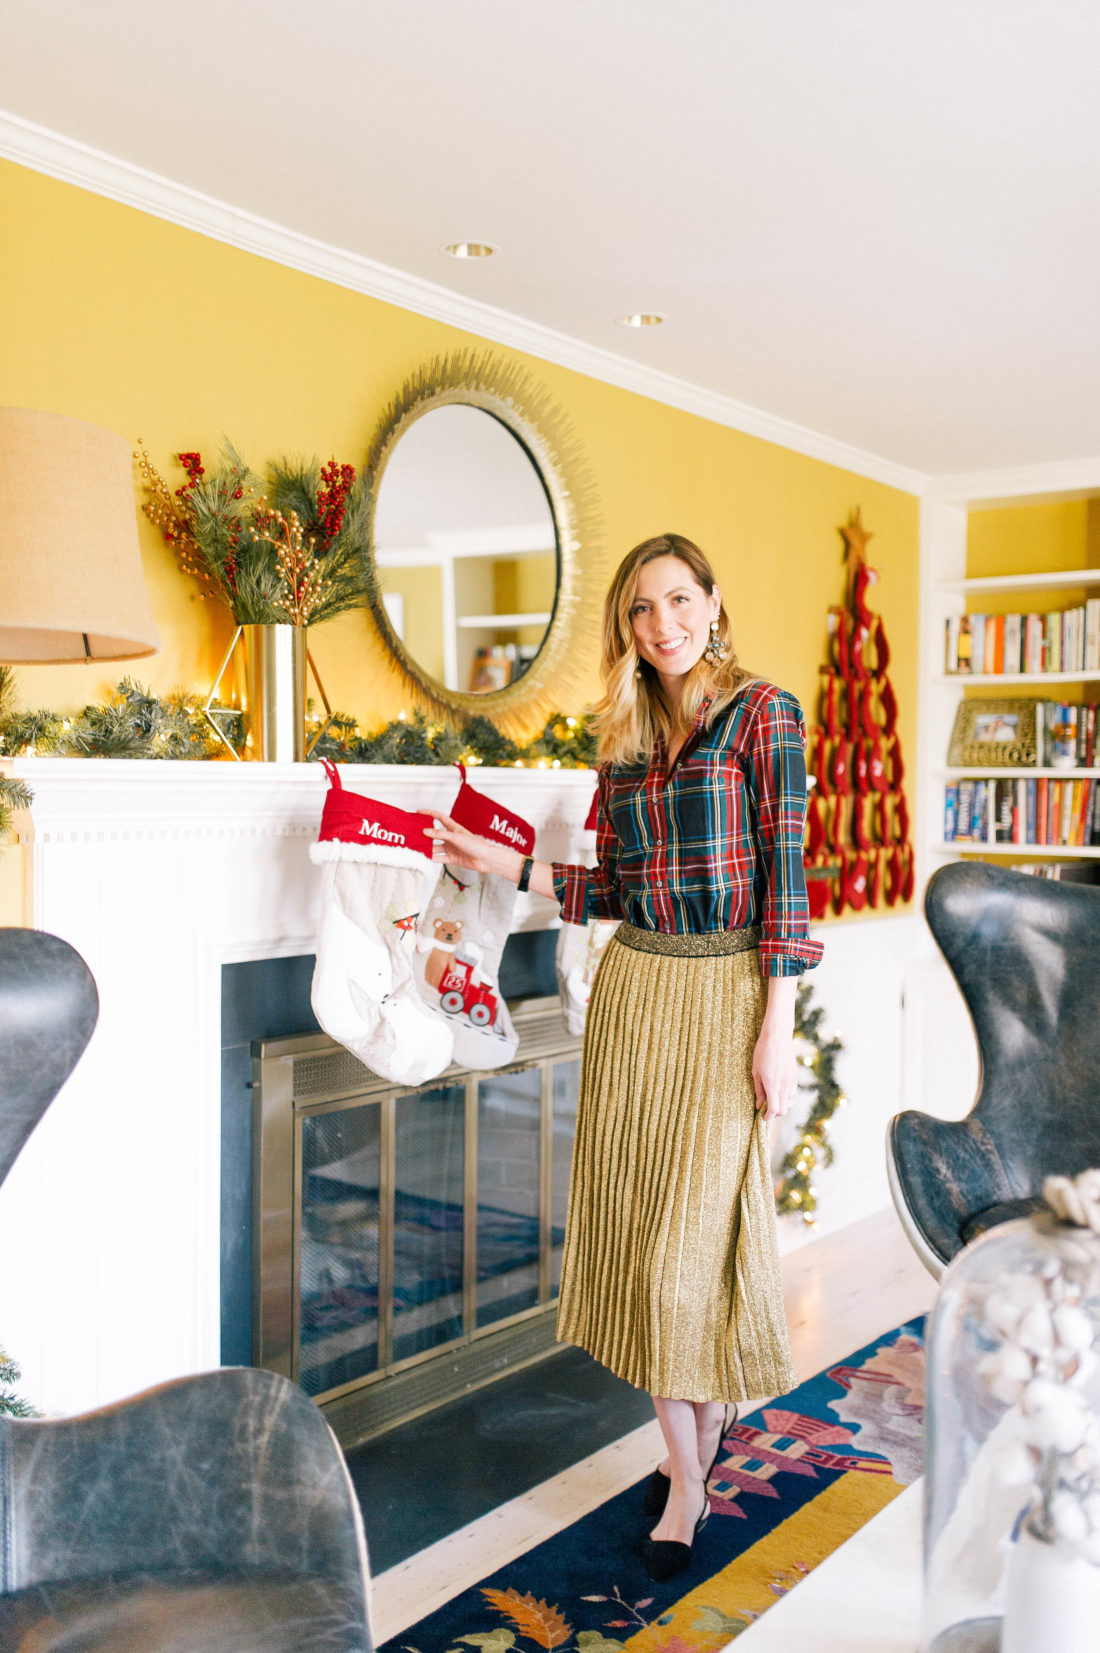 Eva Amurri Martino stands in front of the mantel in her living room that his hung with stockings for Christmas